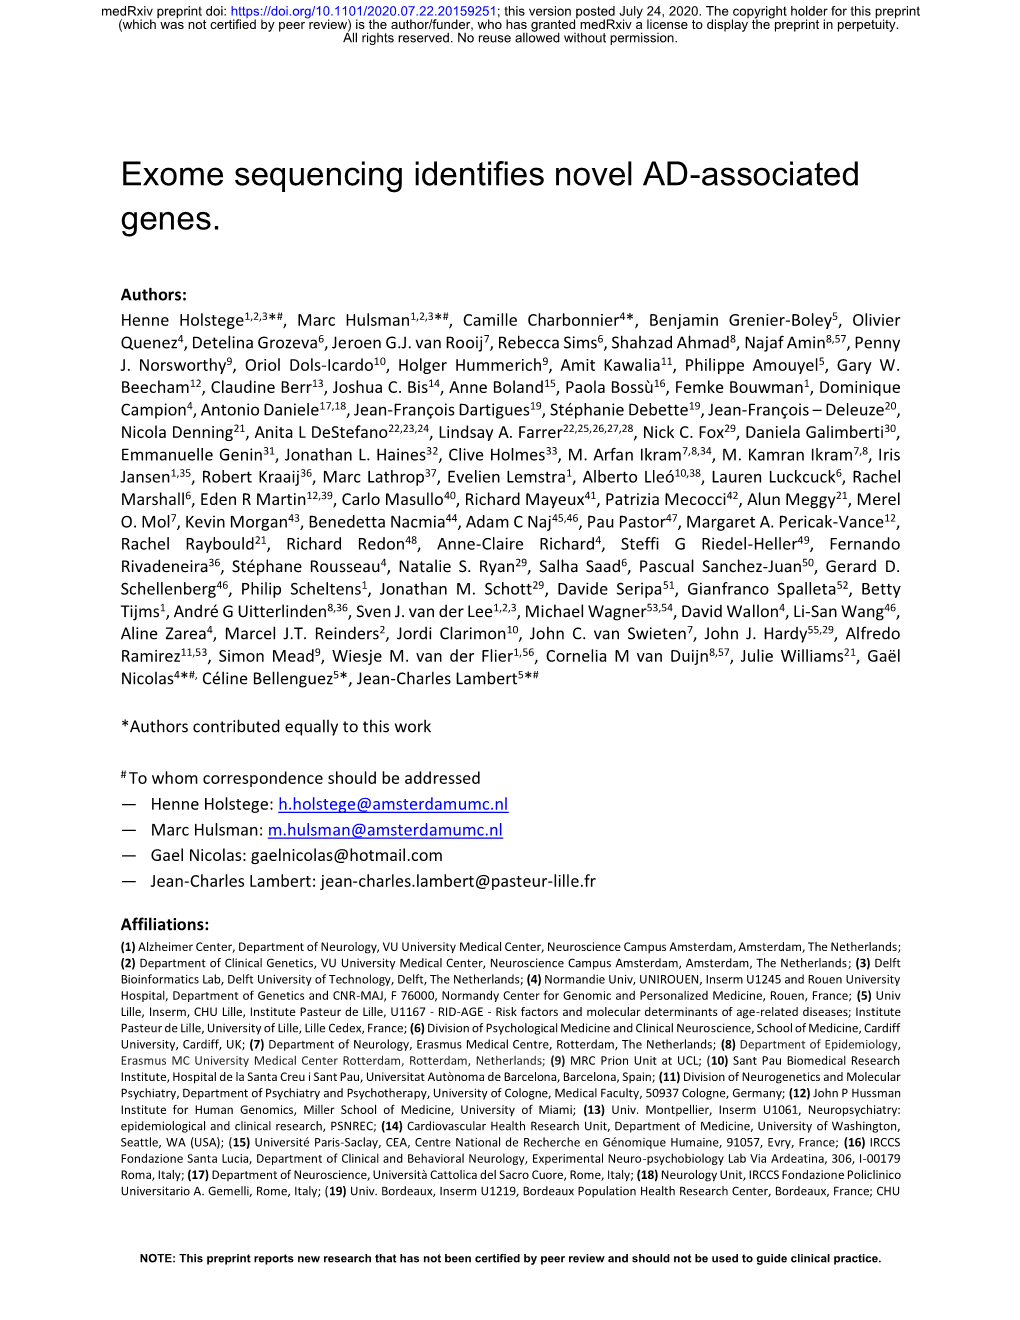 Exome Sequencing Identifies Novel AD-Associated Genes